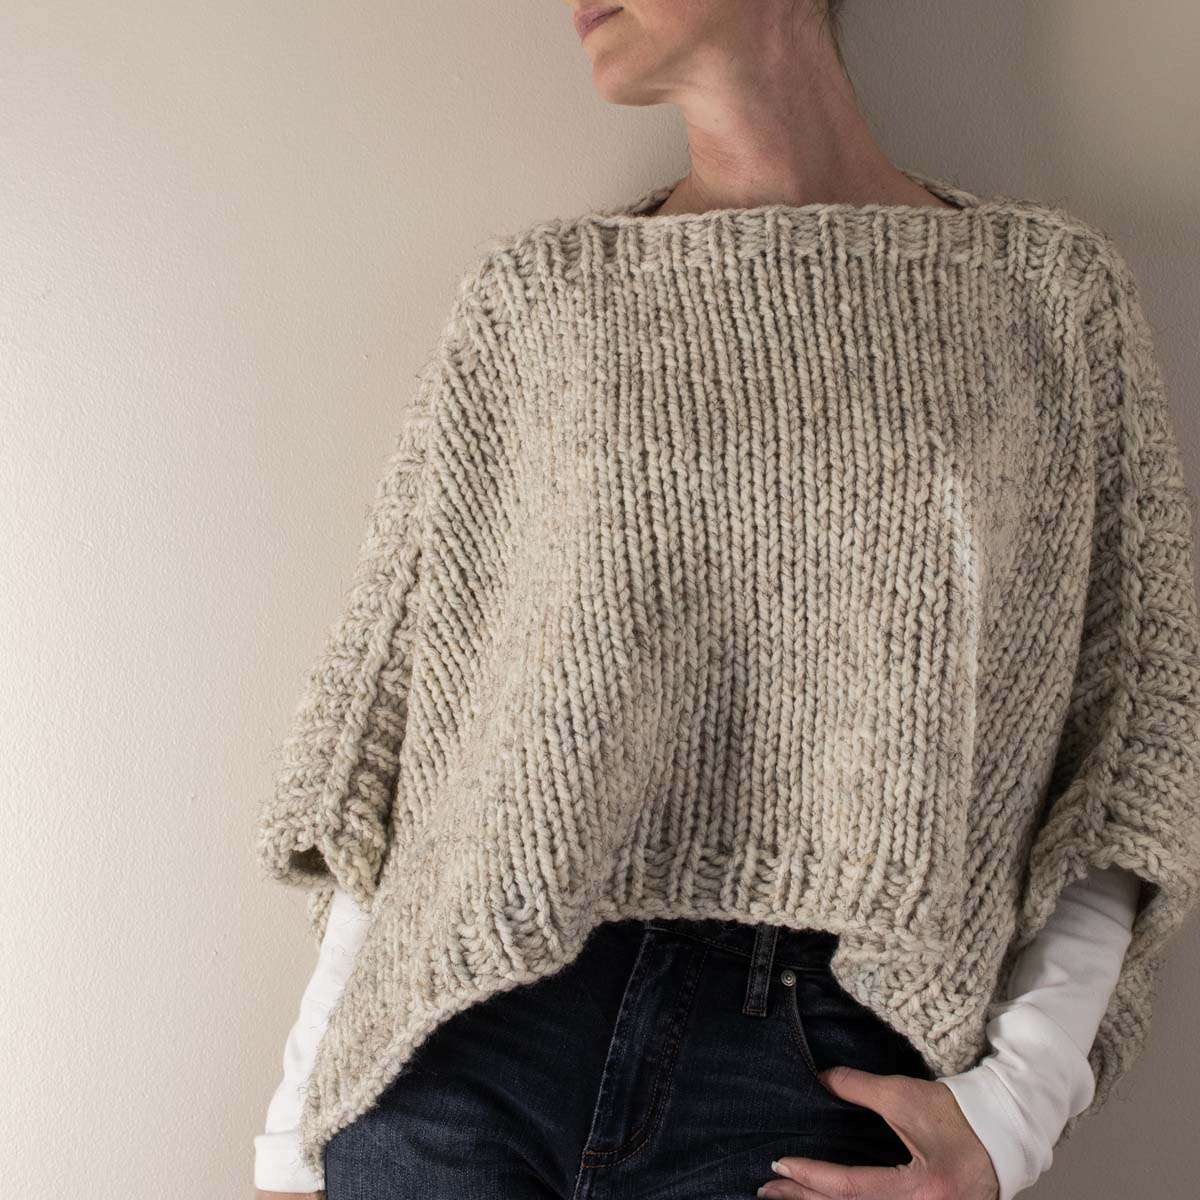 Knitted poncho pattern